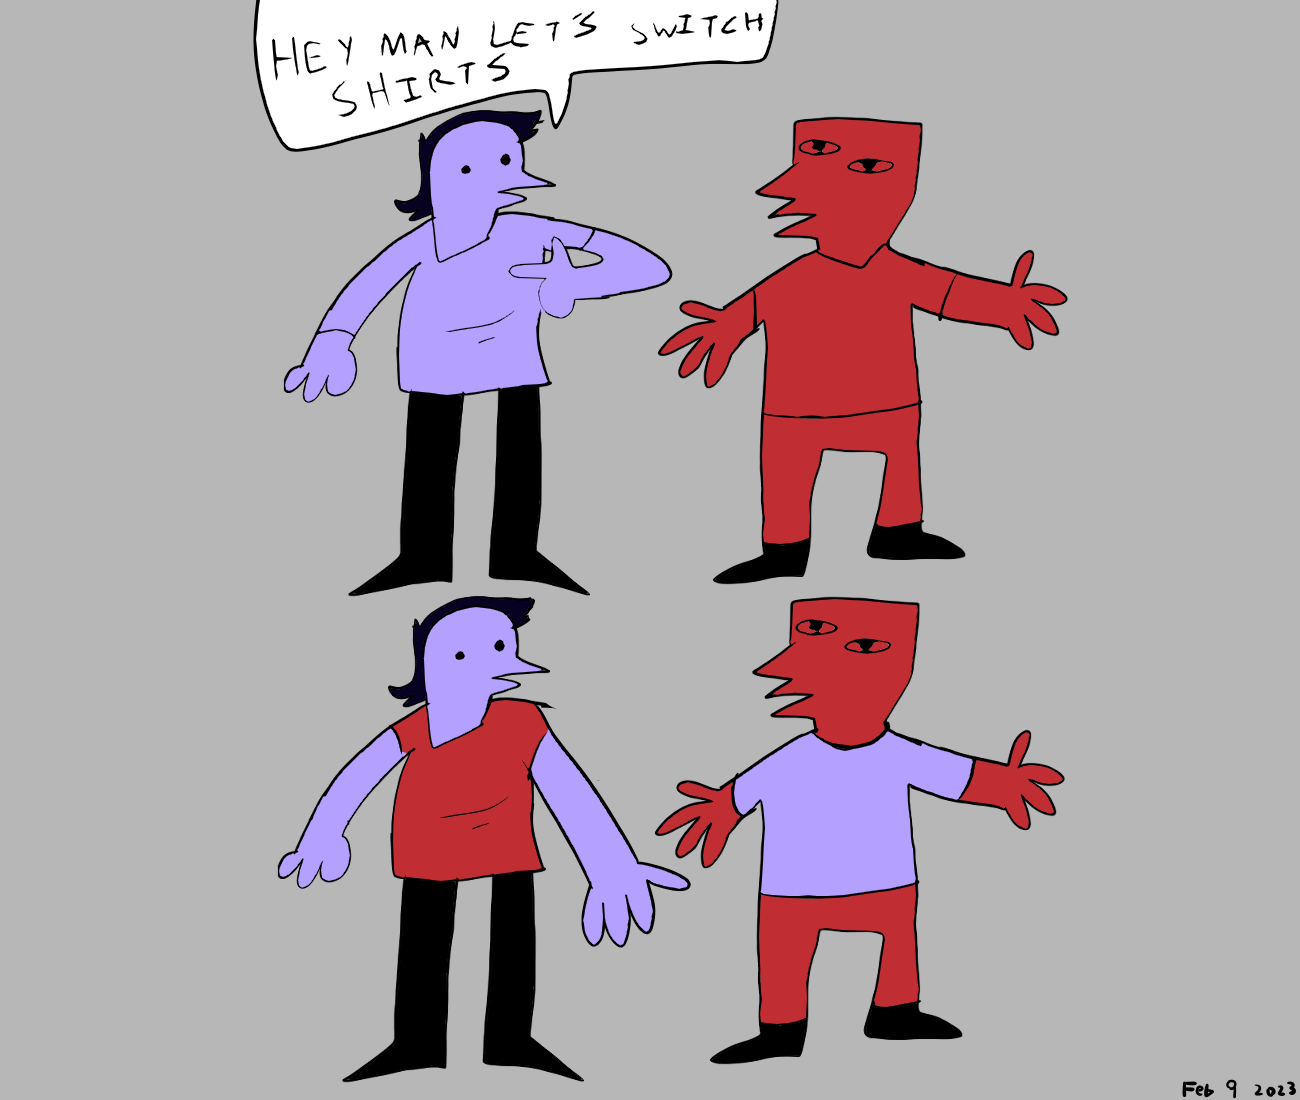 A purple and red character stand next to eachother. The purple one says 'lets switch shirts' to the red one. Once the switch, the purple character is wearing a red shirt and the red character is wearing a purple shirt.